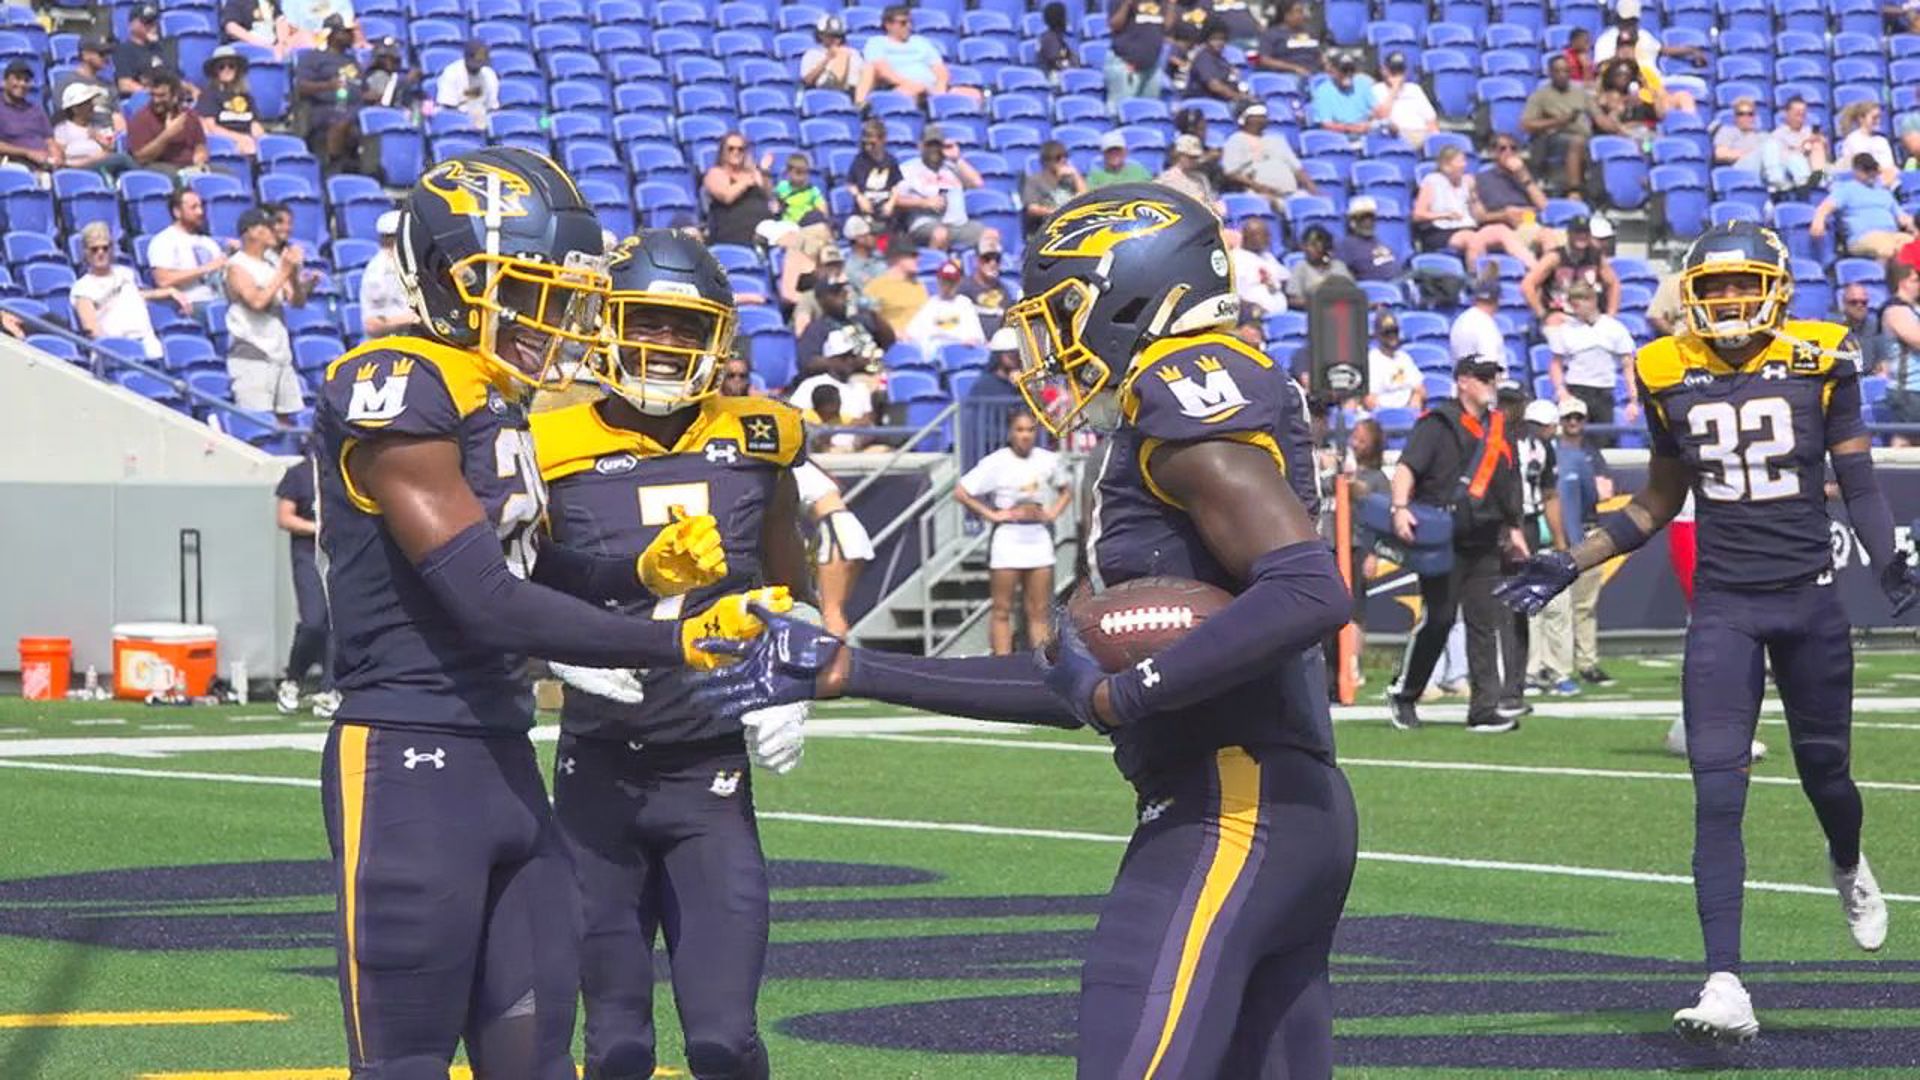 Watch: The Memphis Showboats drop to 1-8 after a 36-21 loss to the DC Defenders. Also, Tennessee claim the SEC baseball Championship with a 4-3 win over LSU.